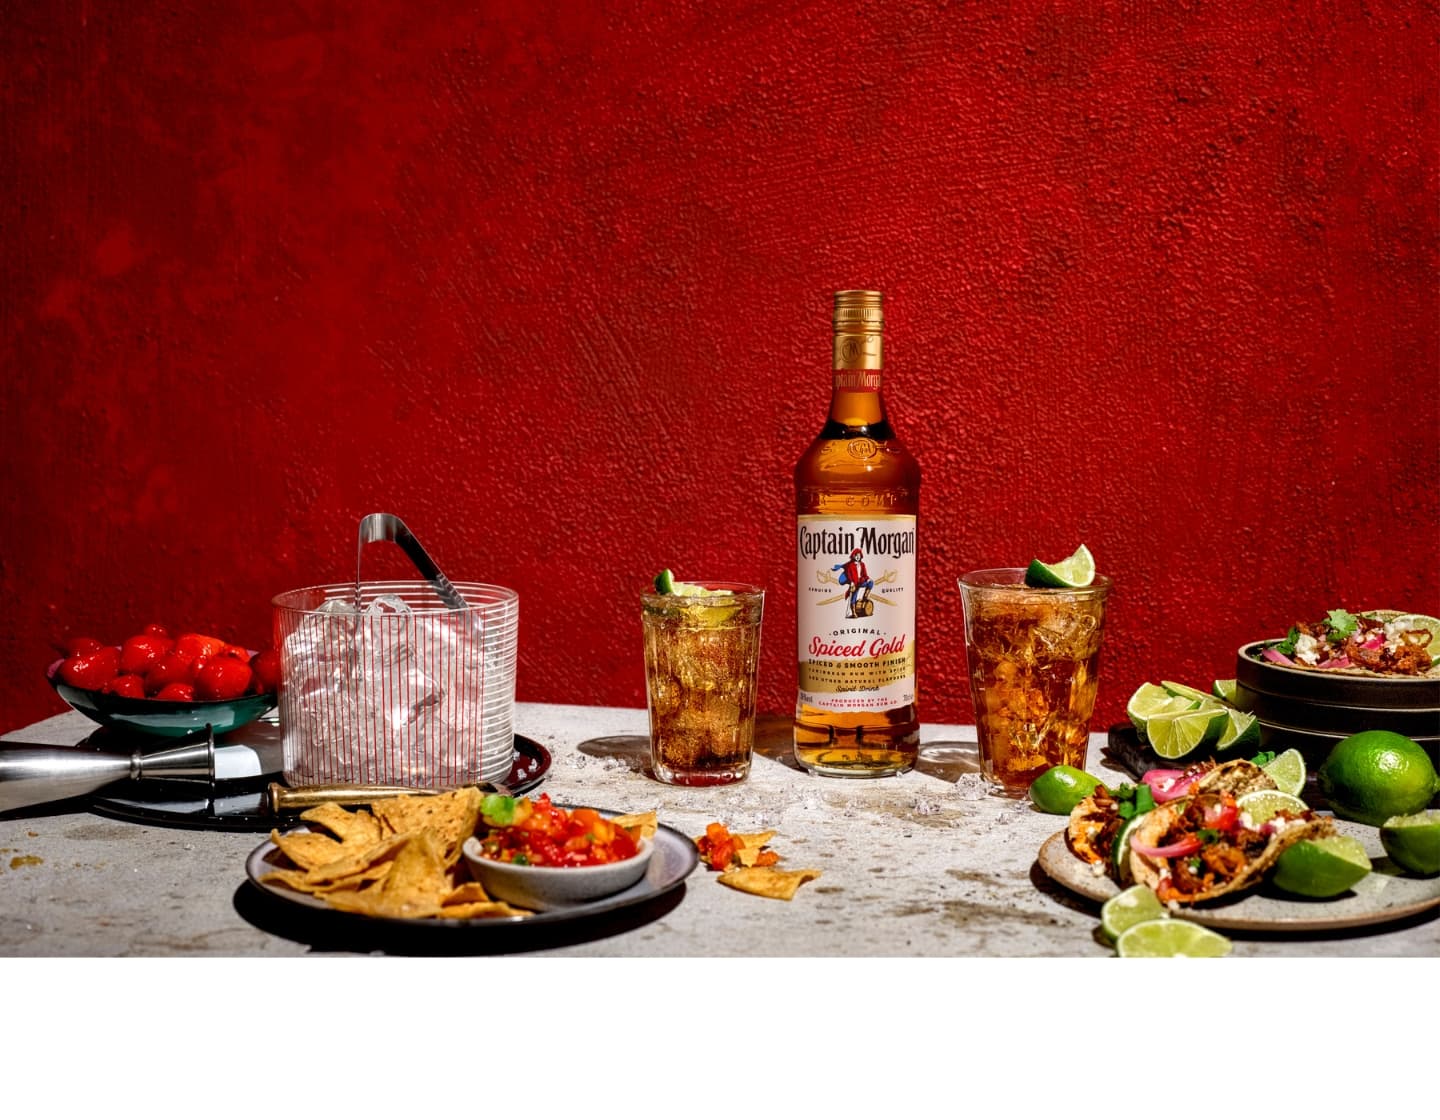 Bottle of Captain Morgan Spiced Gold rum on table beside two iced glasses of rum and coke surrounded by food